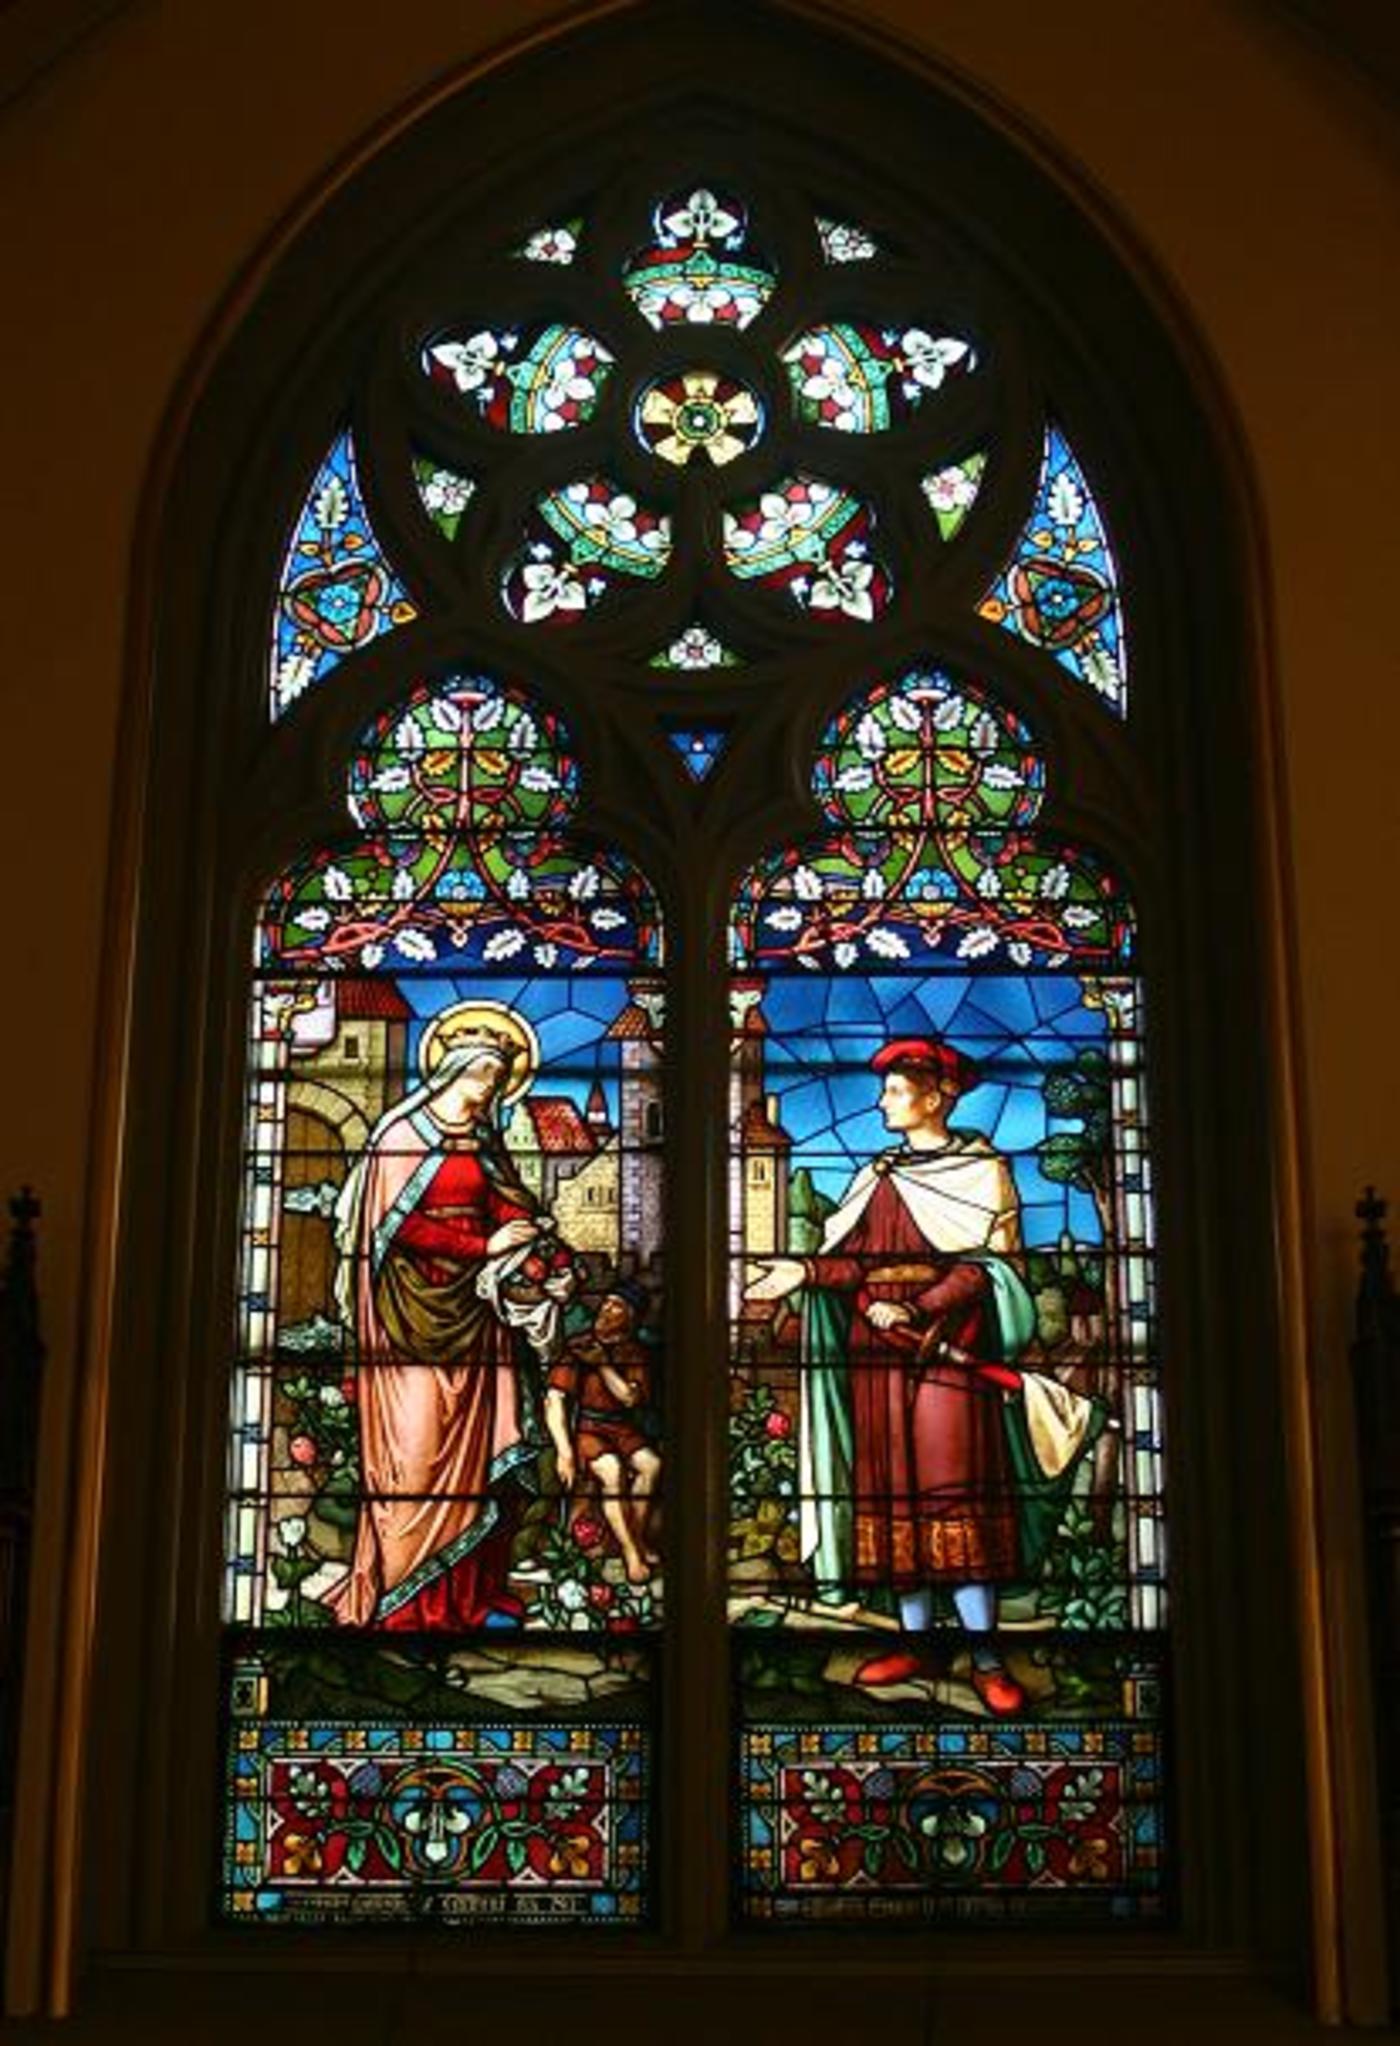 Windows 4A and 4B: St. Elizabeth of Hungary and Blessed Ludwig